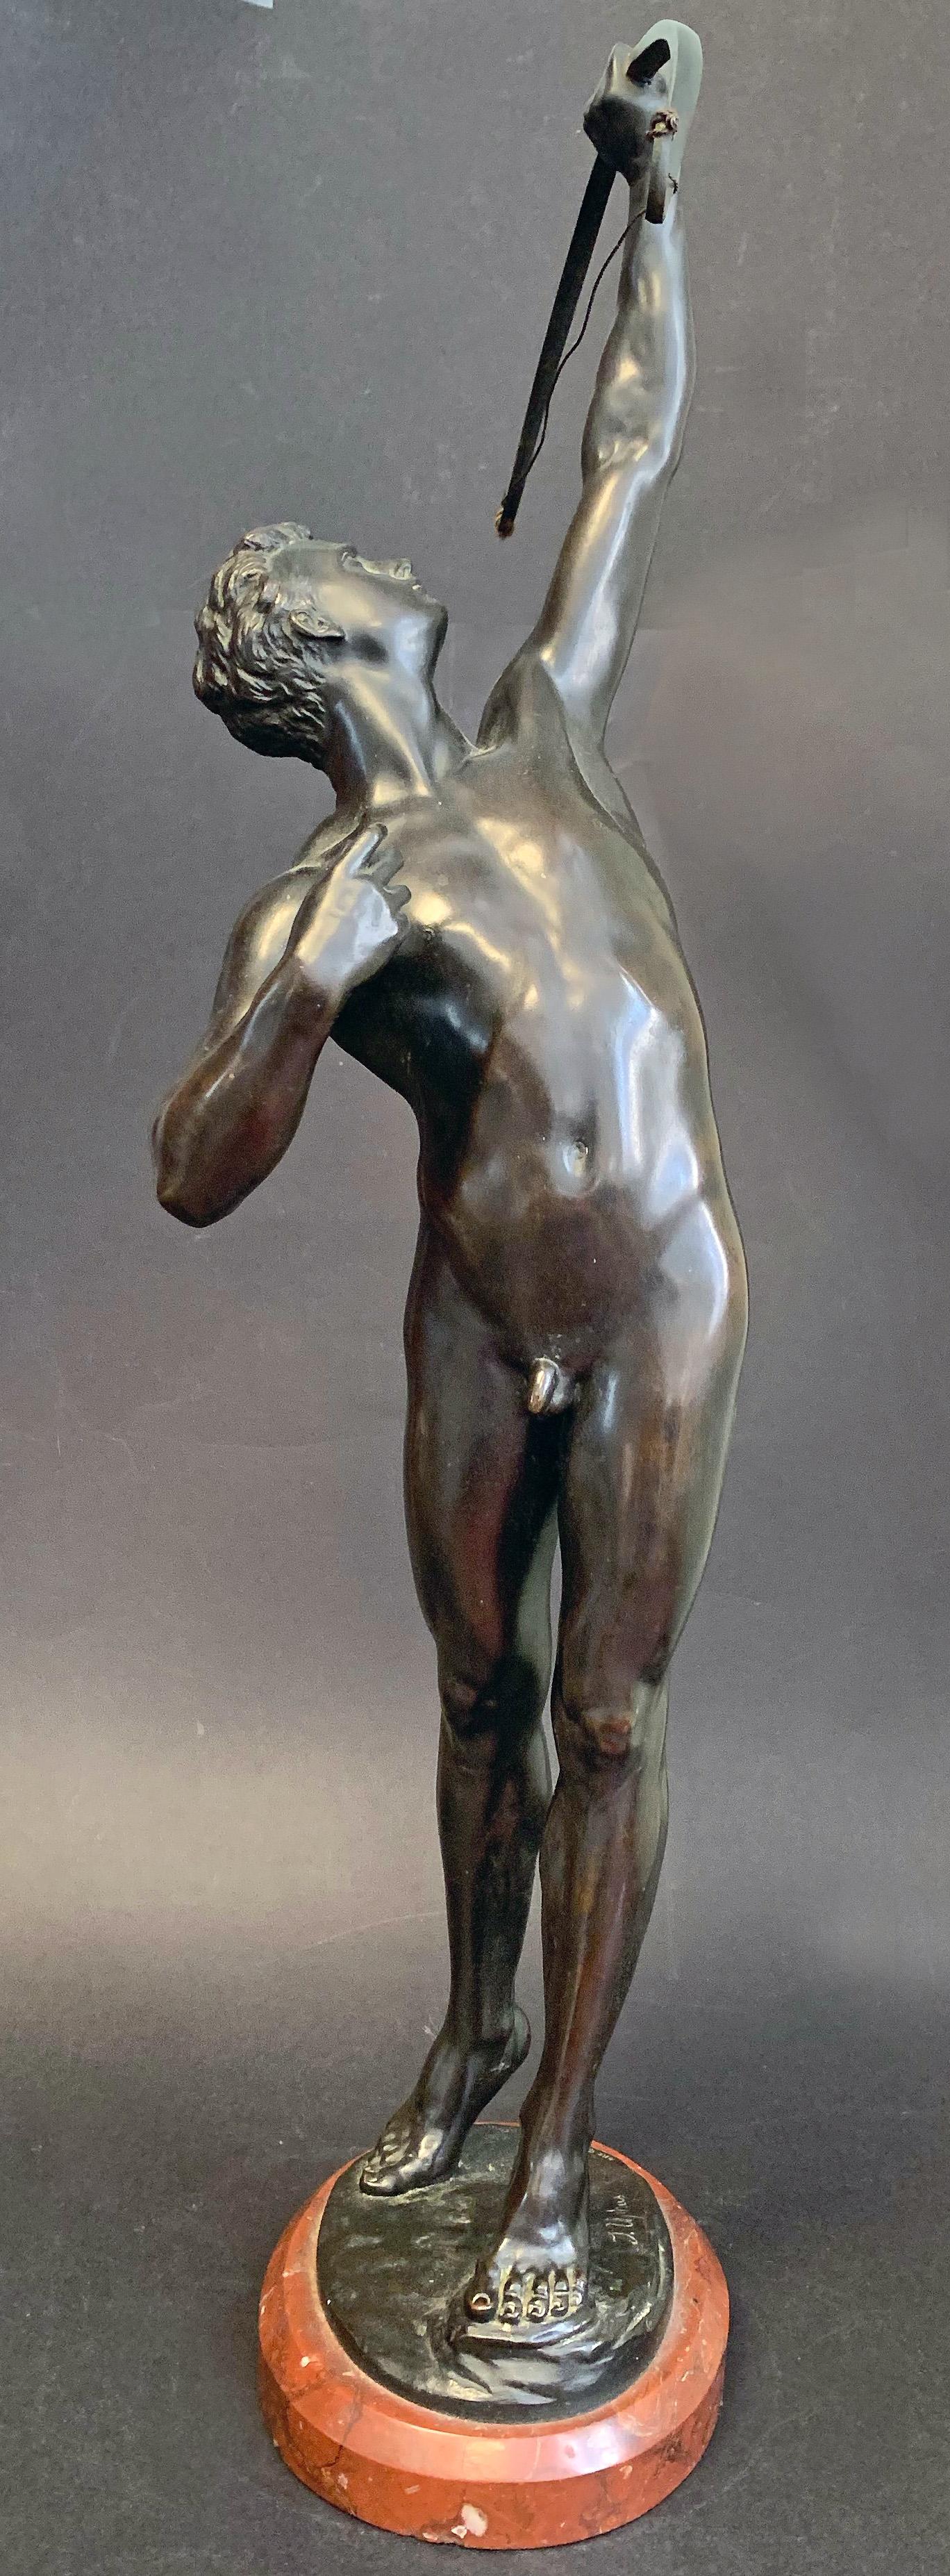 In our opinion, one of the greatest depictions of the male nude in 19th century sculpture, this large bronze by Joseph Uphues depicts a youthful male archer shooting his arrow upwards, no doubt toward a bird overhead. The figure is full of energy